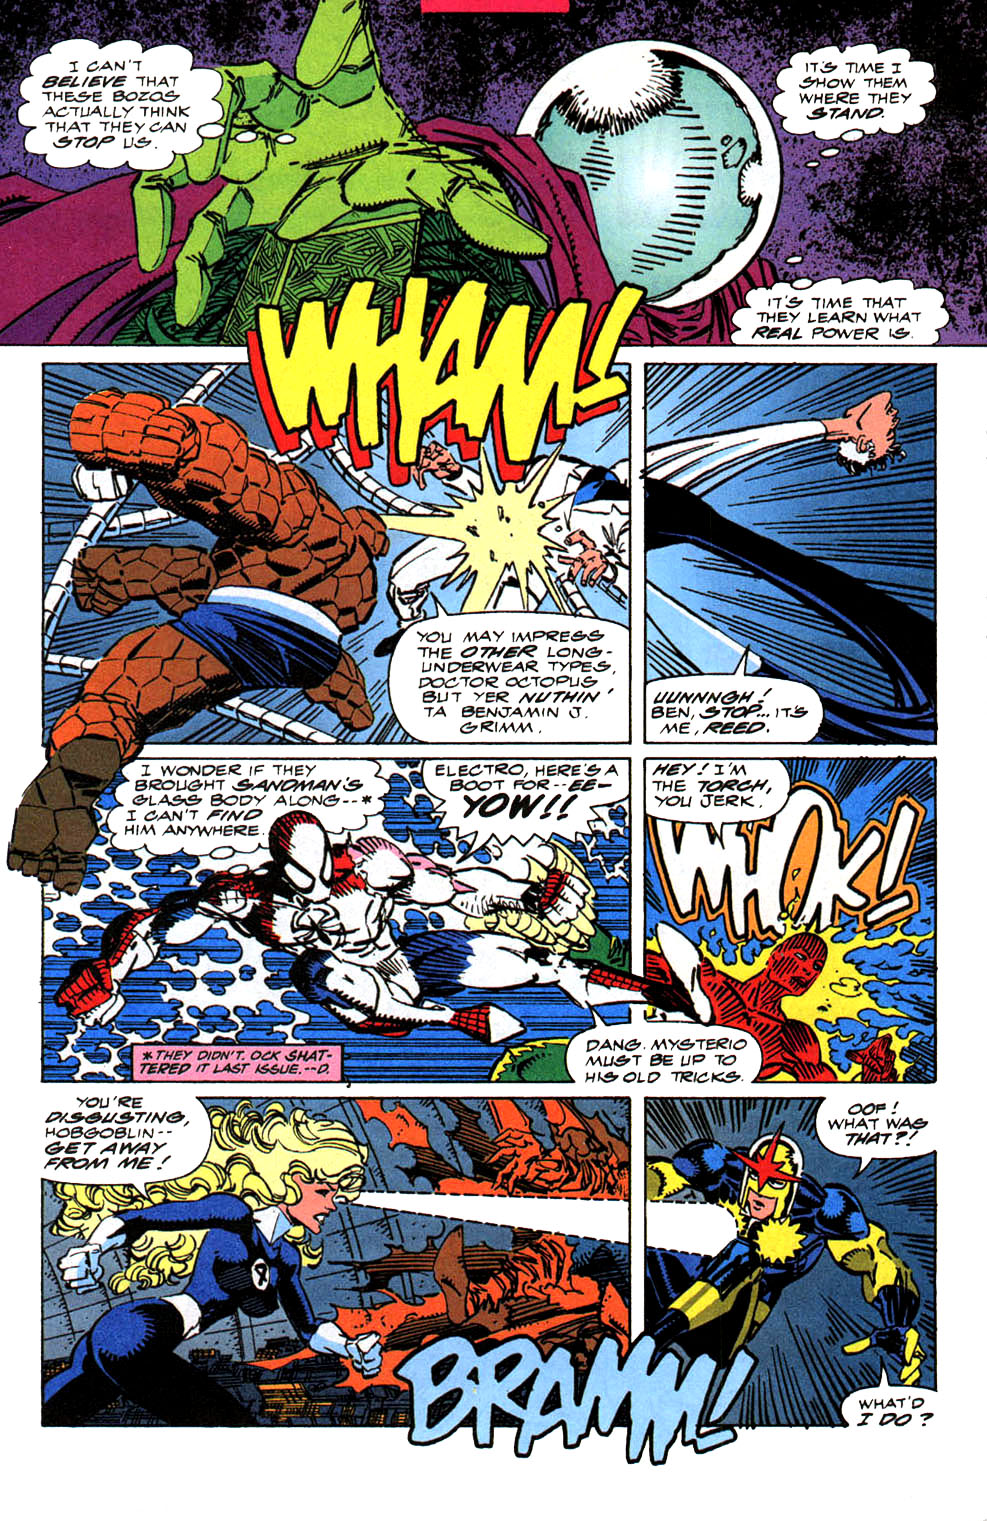 Read Online Spider Man 1990 Comic Issue 23 Confrontation